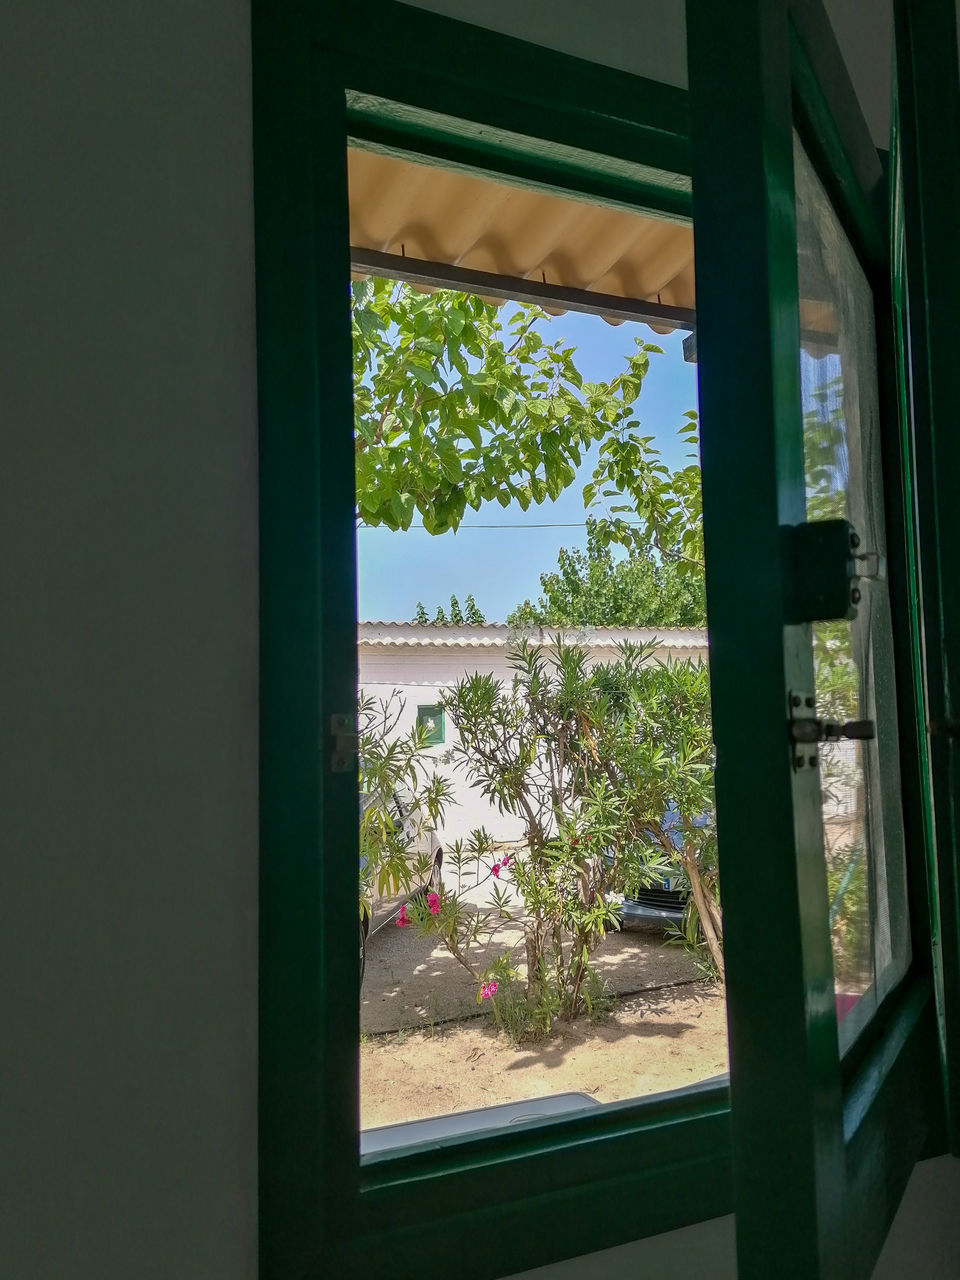 window, green, plant, architecture, glass, tree, house, indoors, interior design, nature, no people, home, window covering, built structure, day, building, transparent, open, sky, growth, home interior, residential district, wall